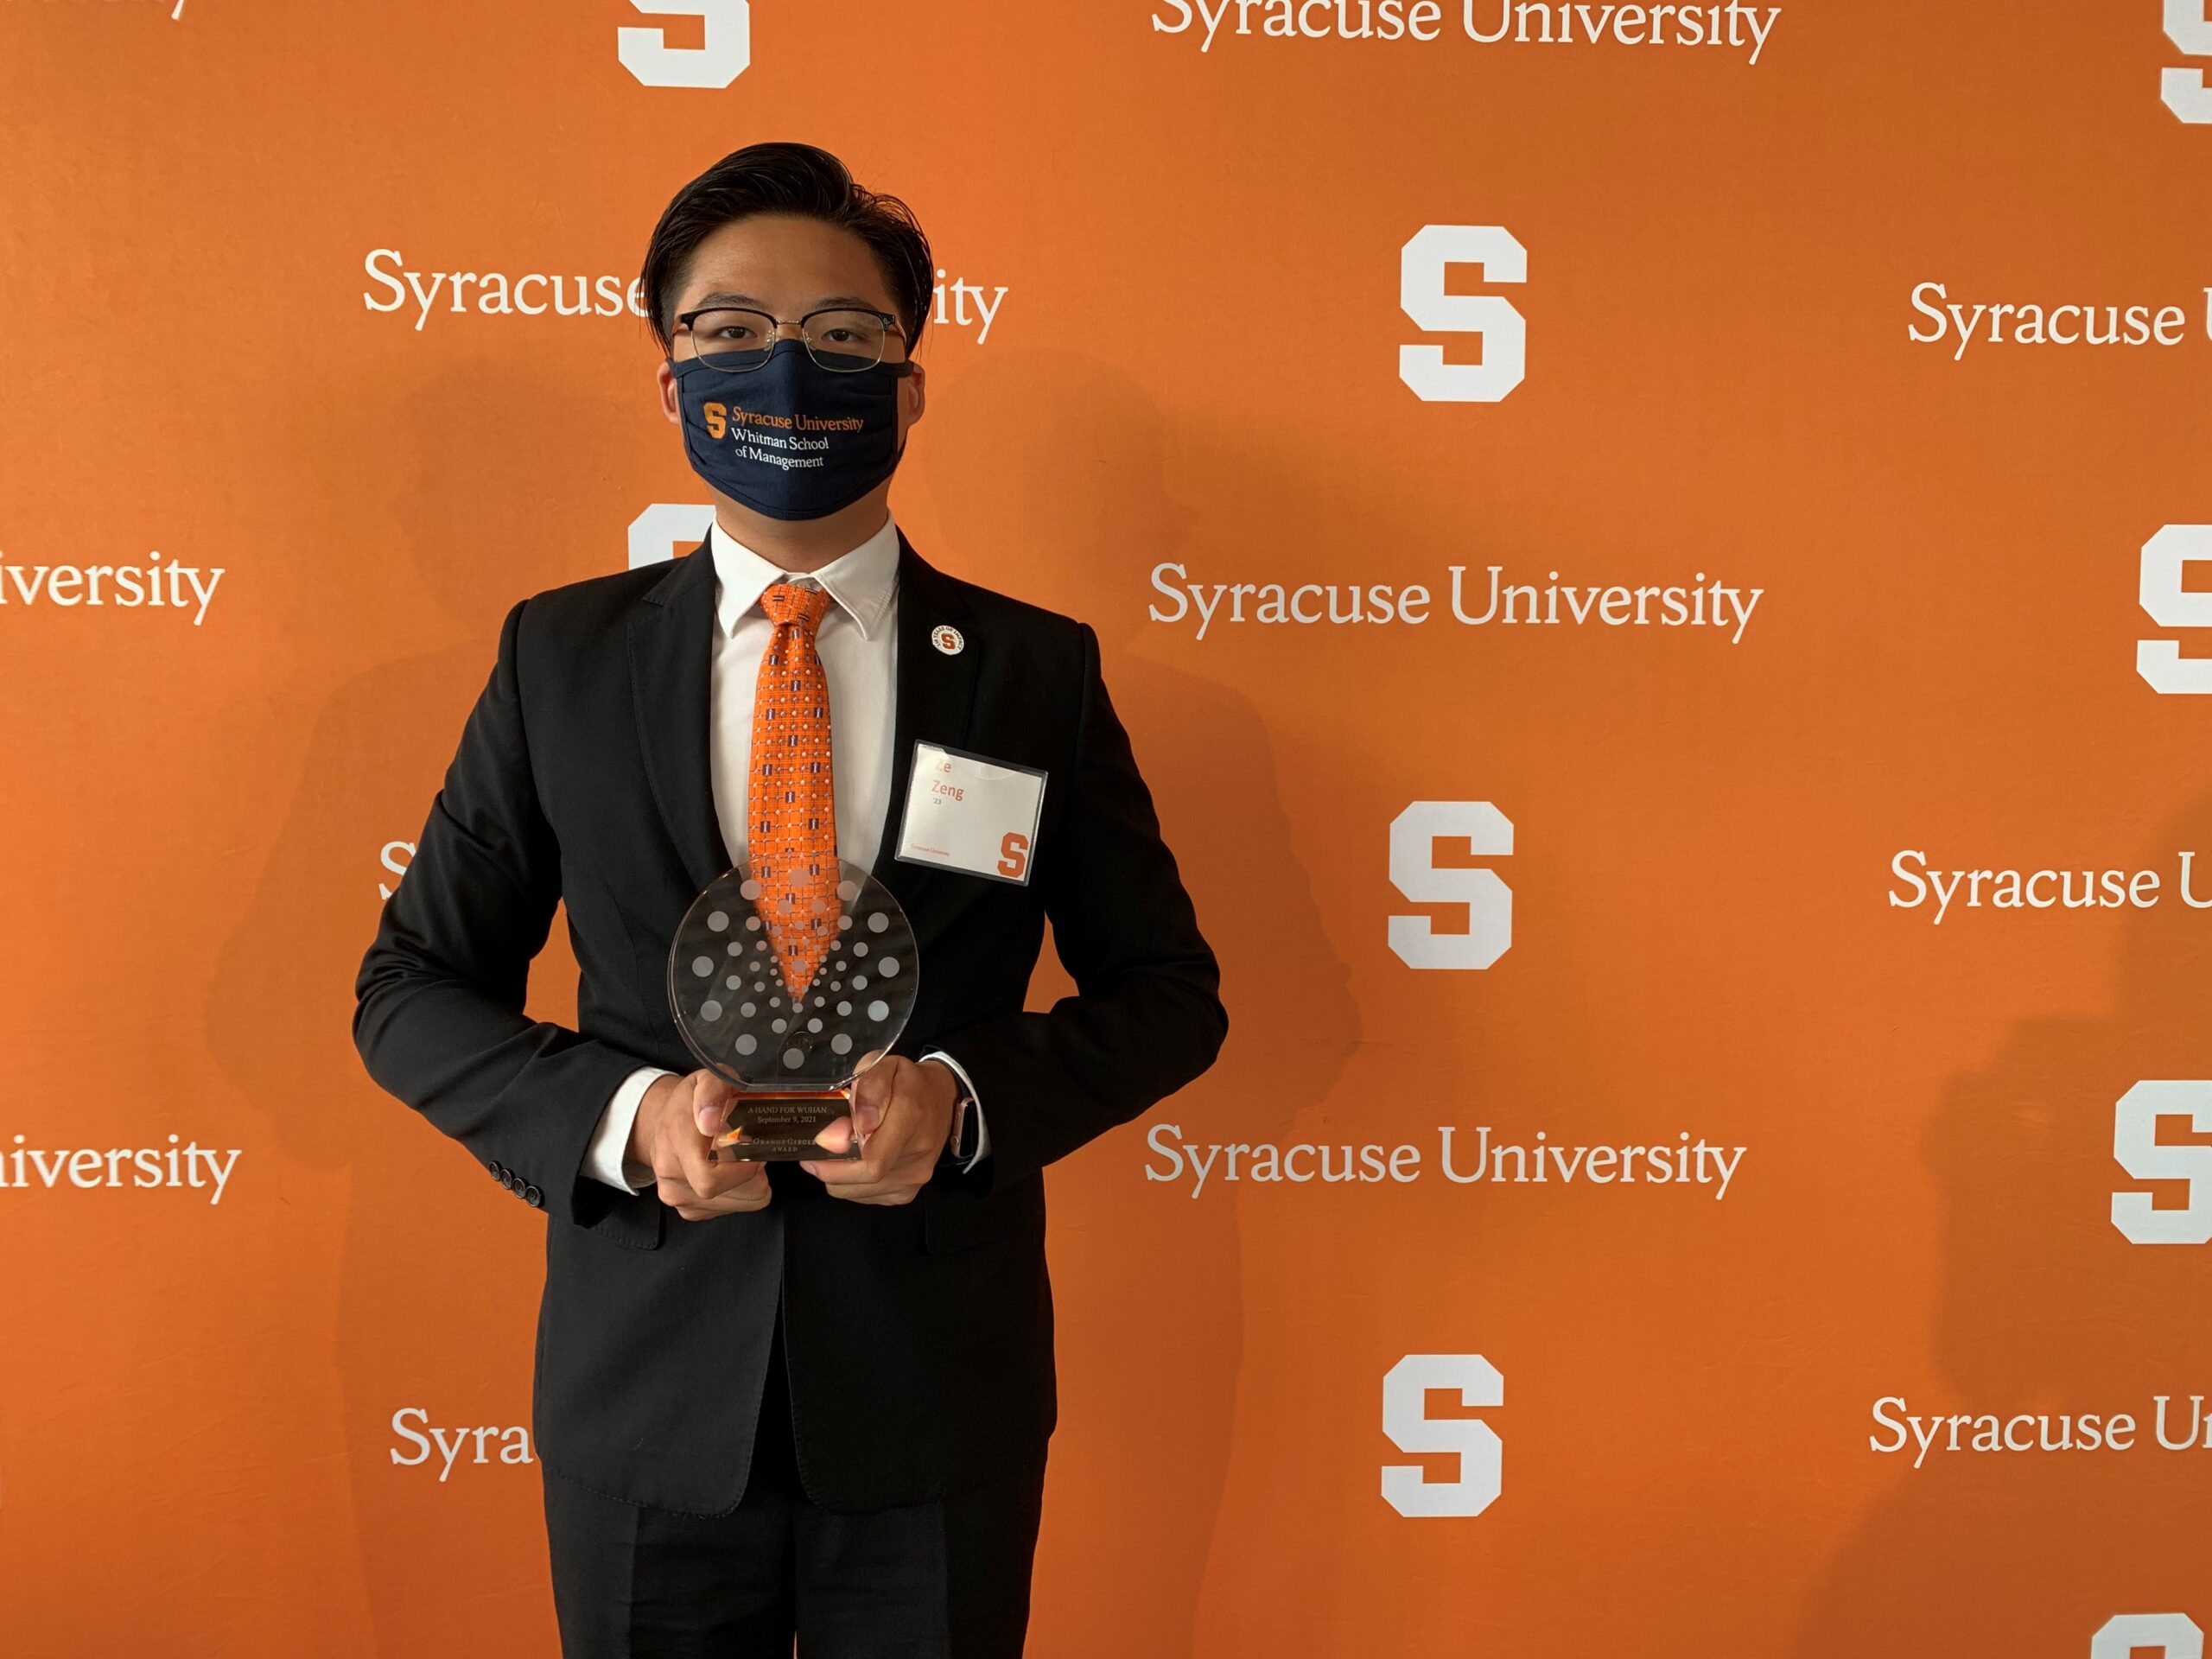 Ze Zeng ’23 advocates diversity and inclusion for international